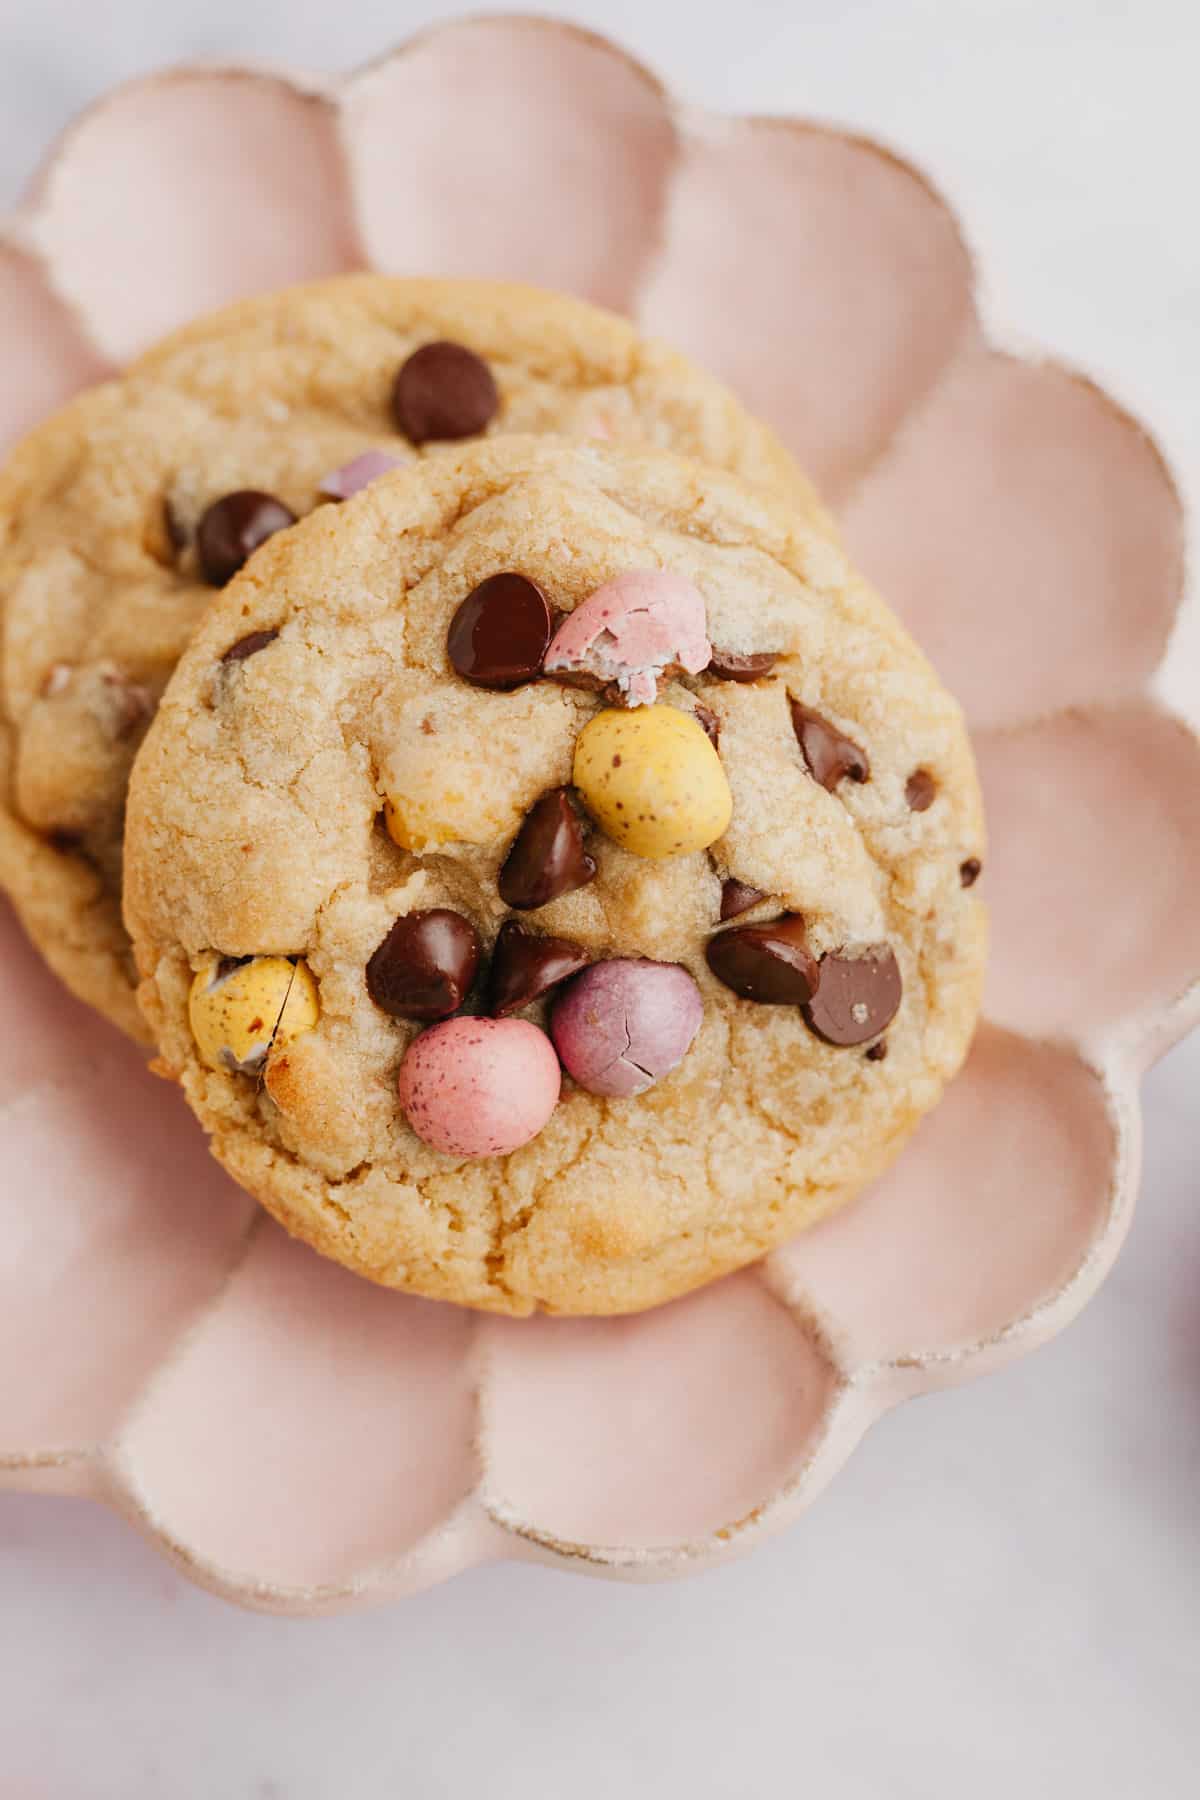 Two mini egg chocolate chip cookies on a small pink plate.